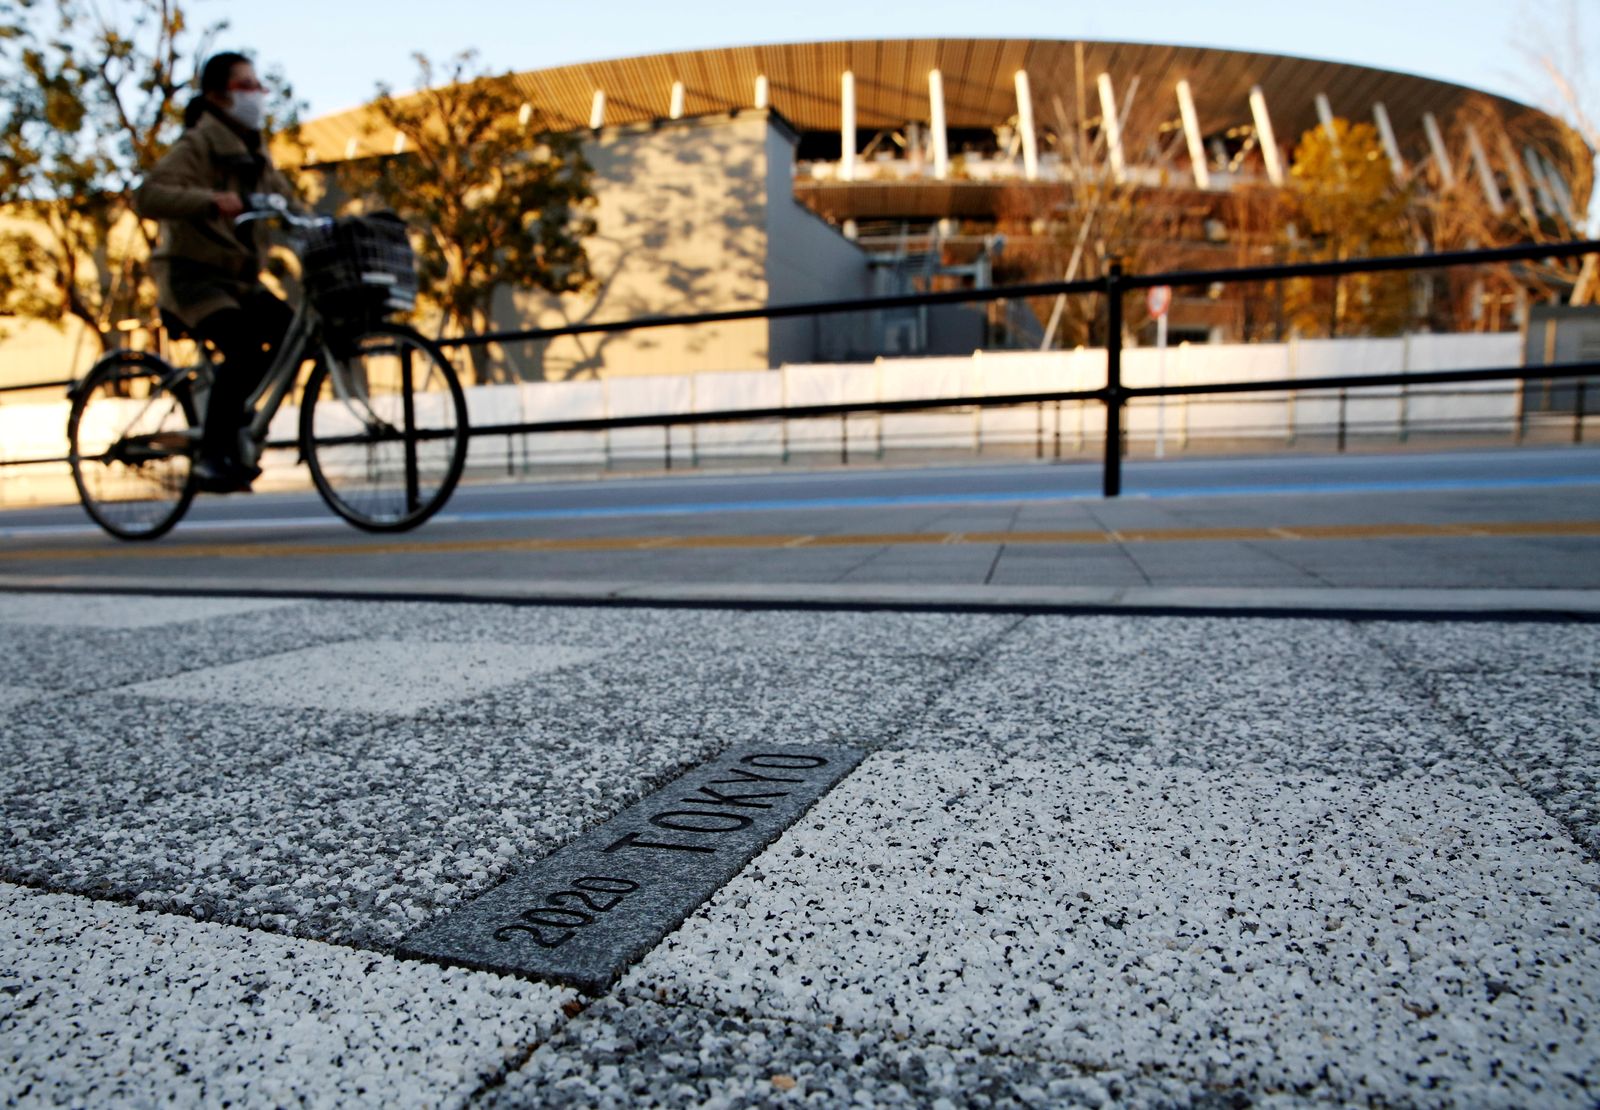 FILE PHOTO: A woman cycles past a sign for Tokyo 2020 Olympic Games on the pavement in front of the National Stadium, the main stadium of Tokyo 2020 Olympics and Paralympics, in Tokyo - REUTERS